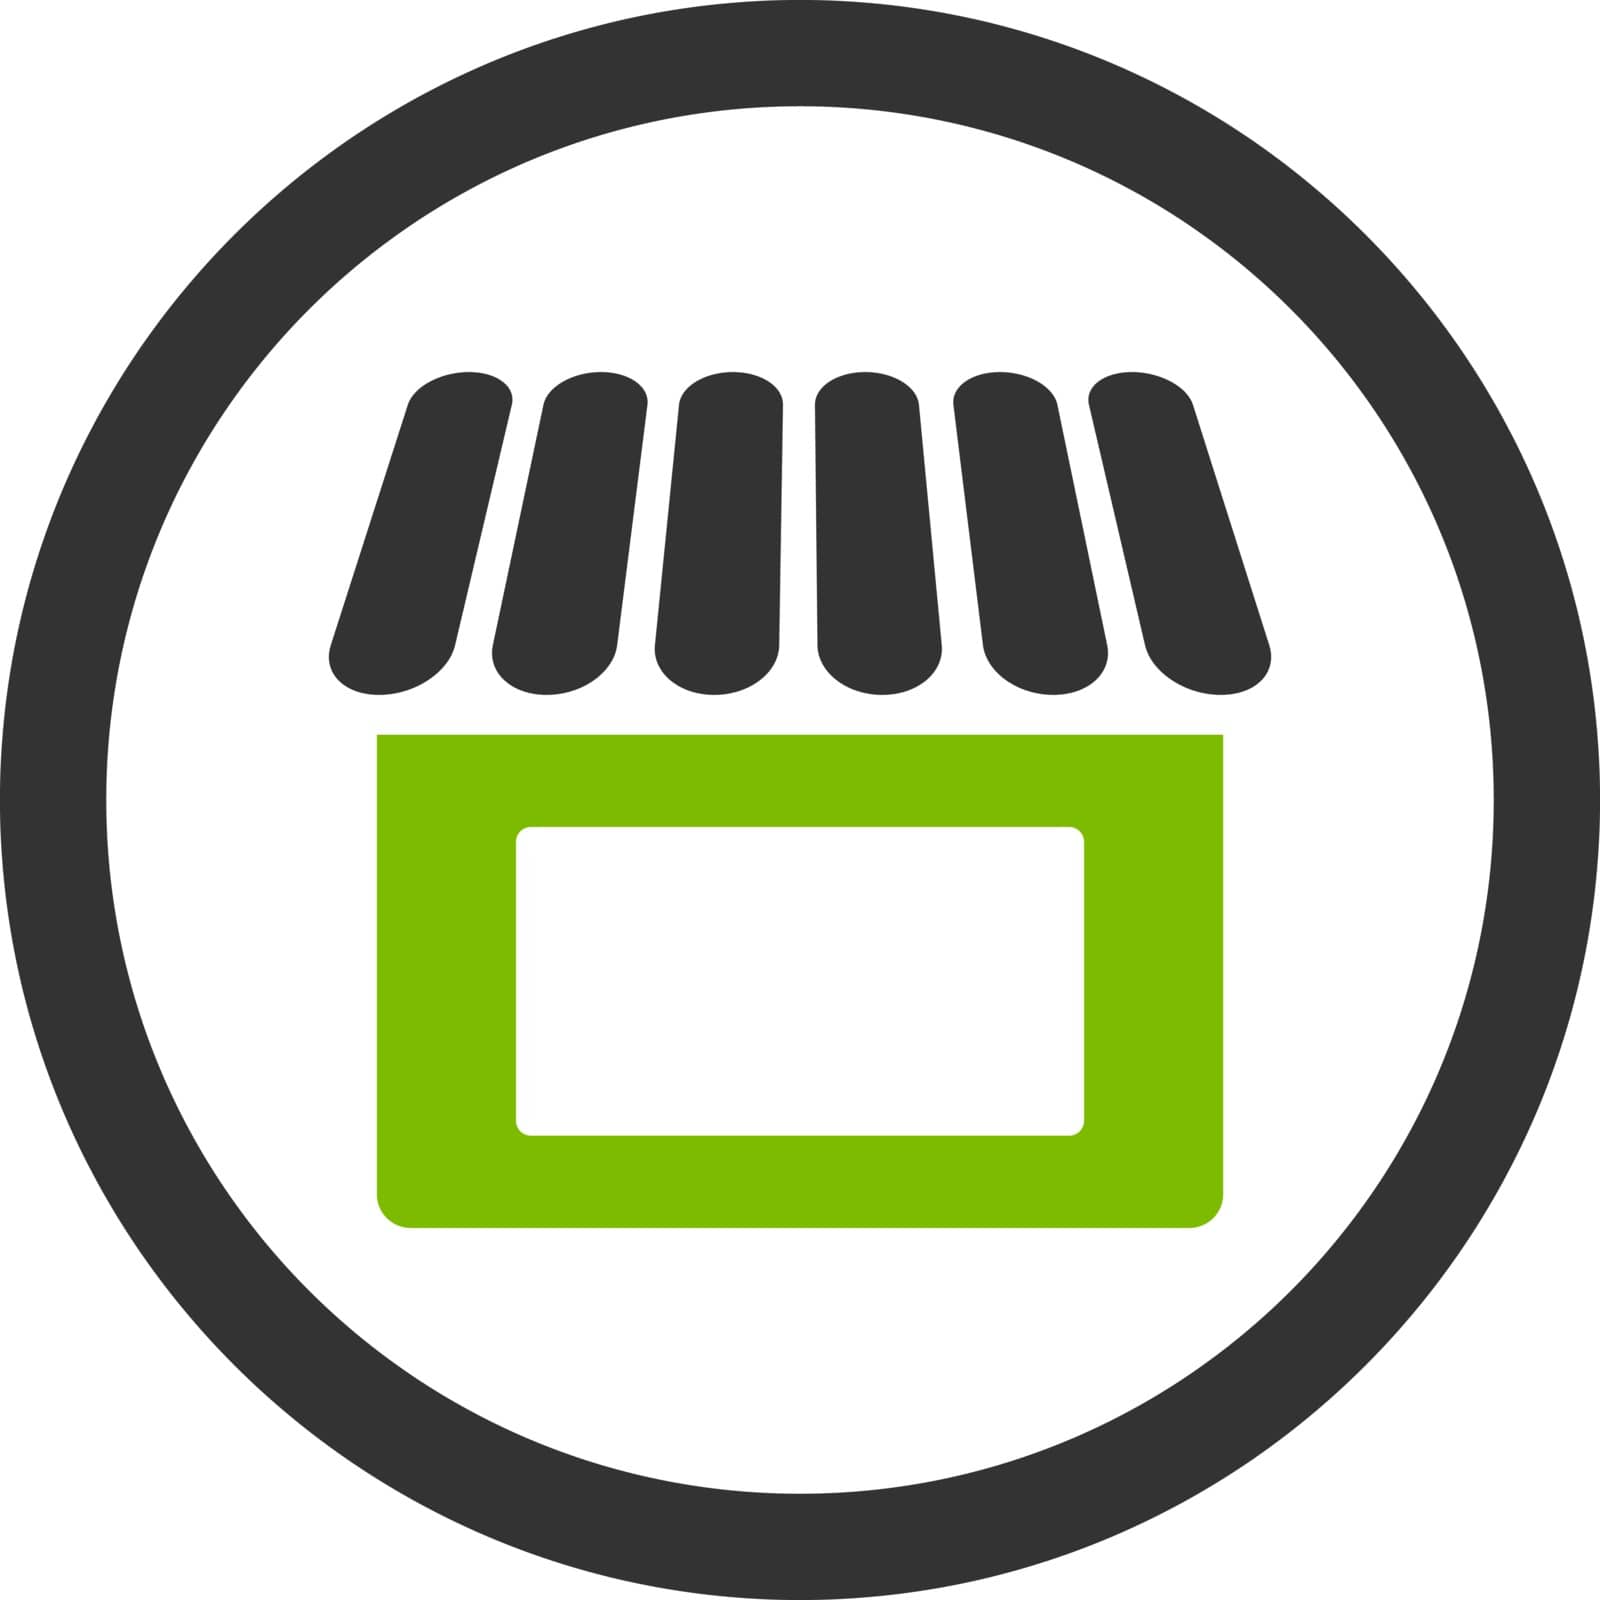 Shop vector icon. This flat rounded symbol uses eco green and gray colors and isolated on a white background.